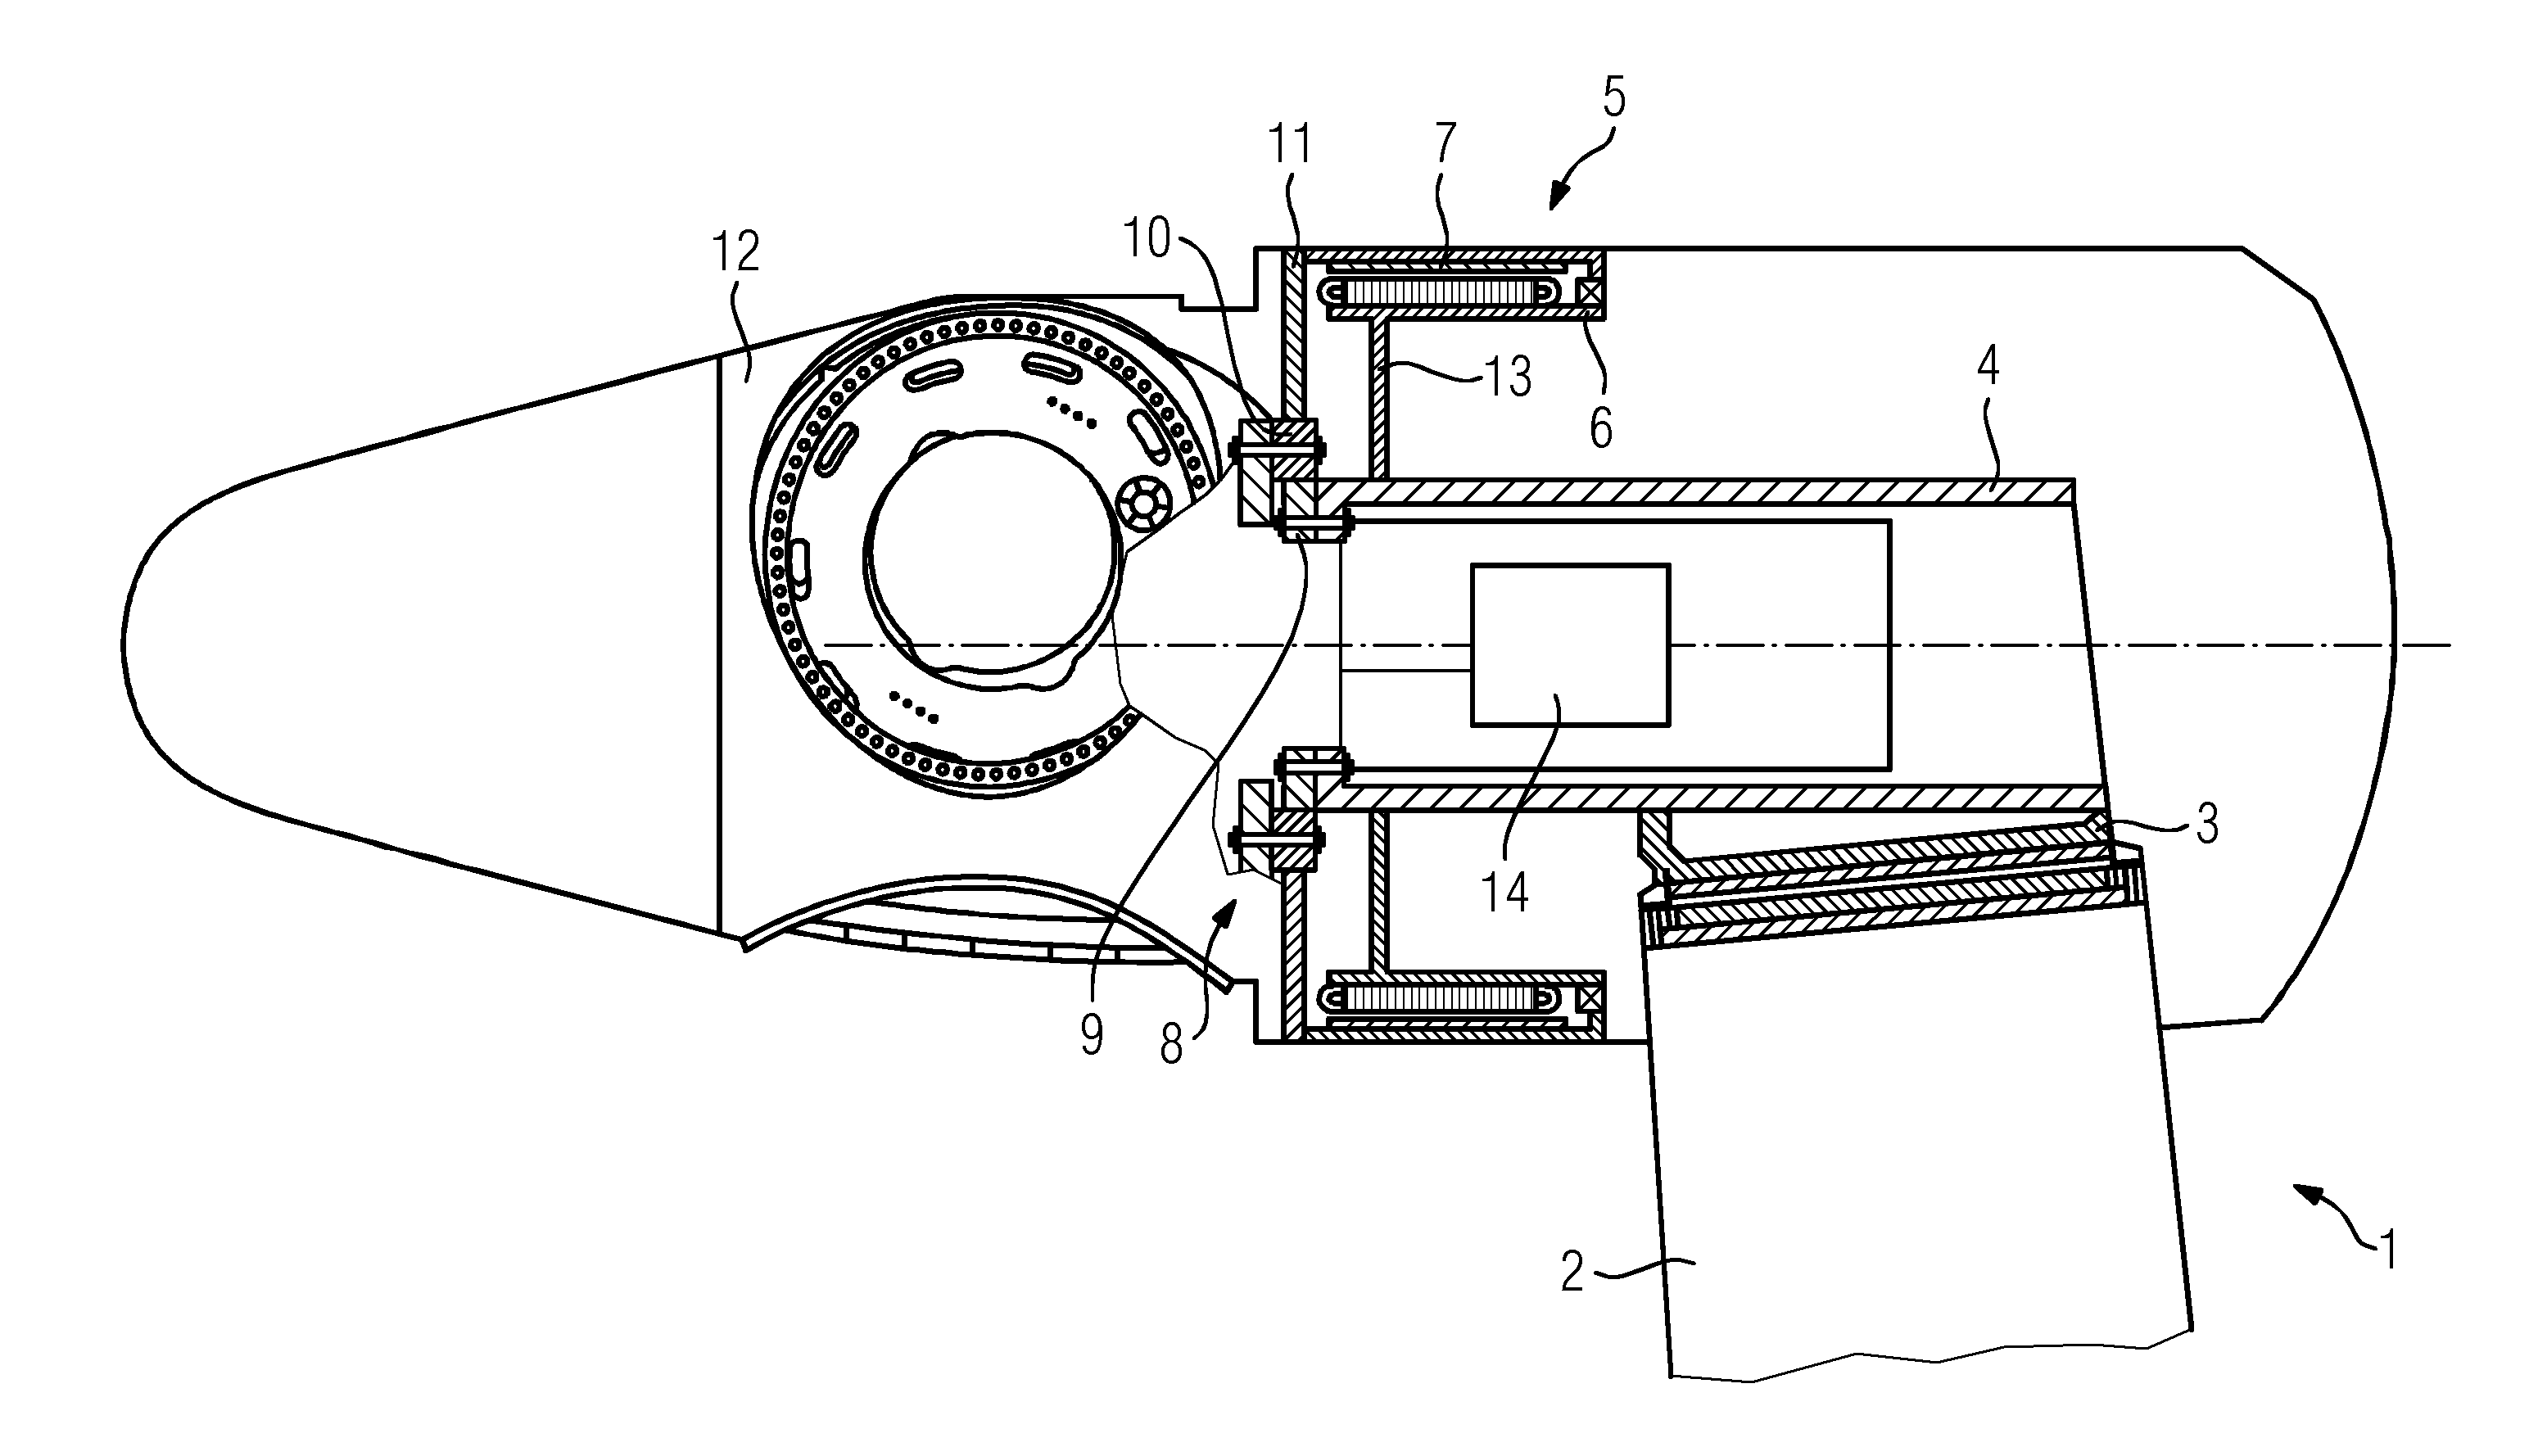 Method for operating a wind turbine